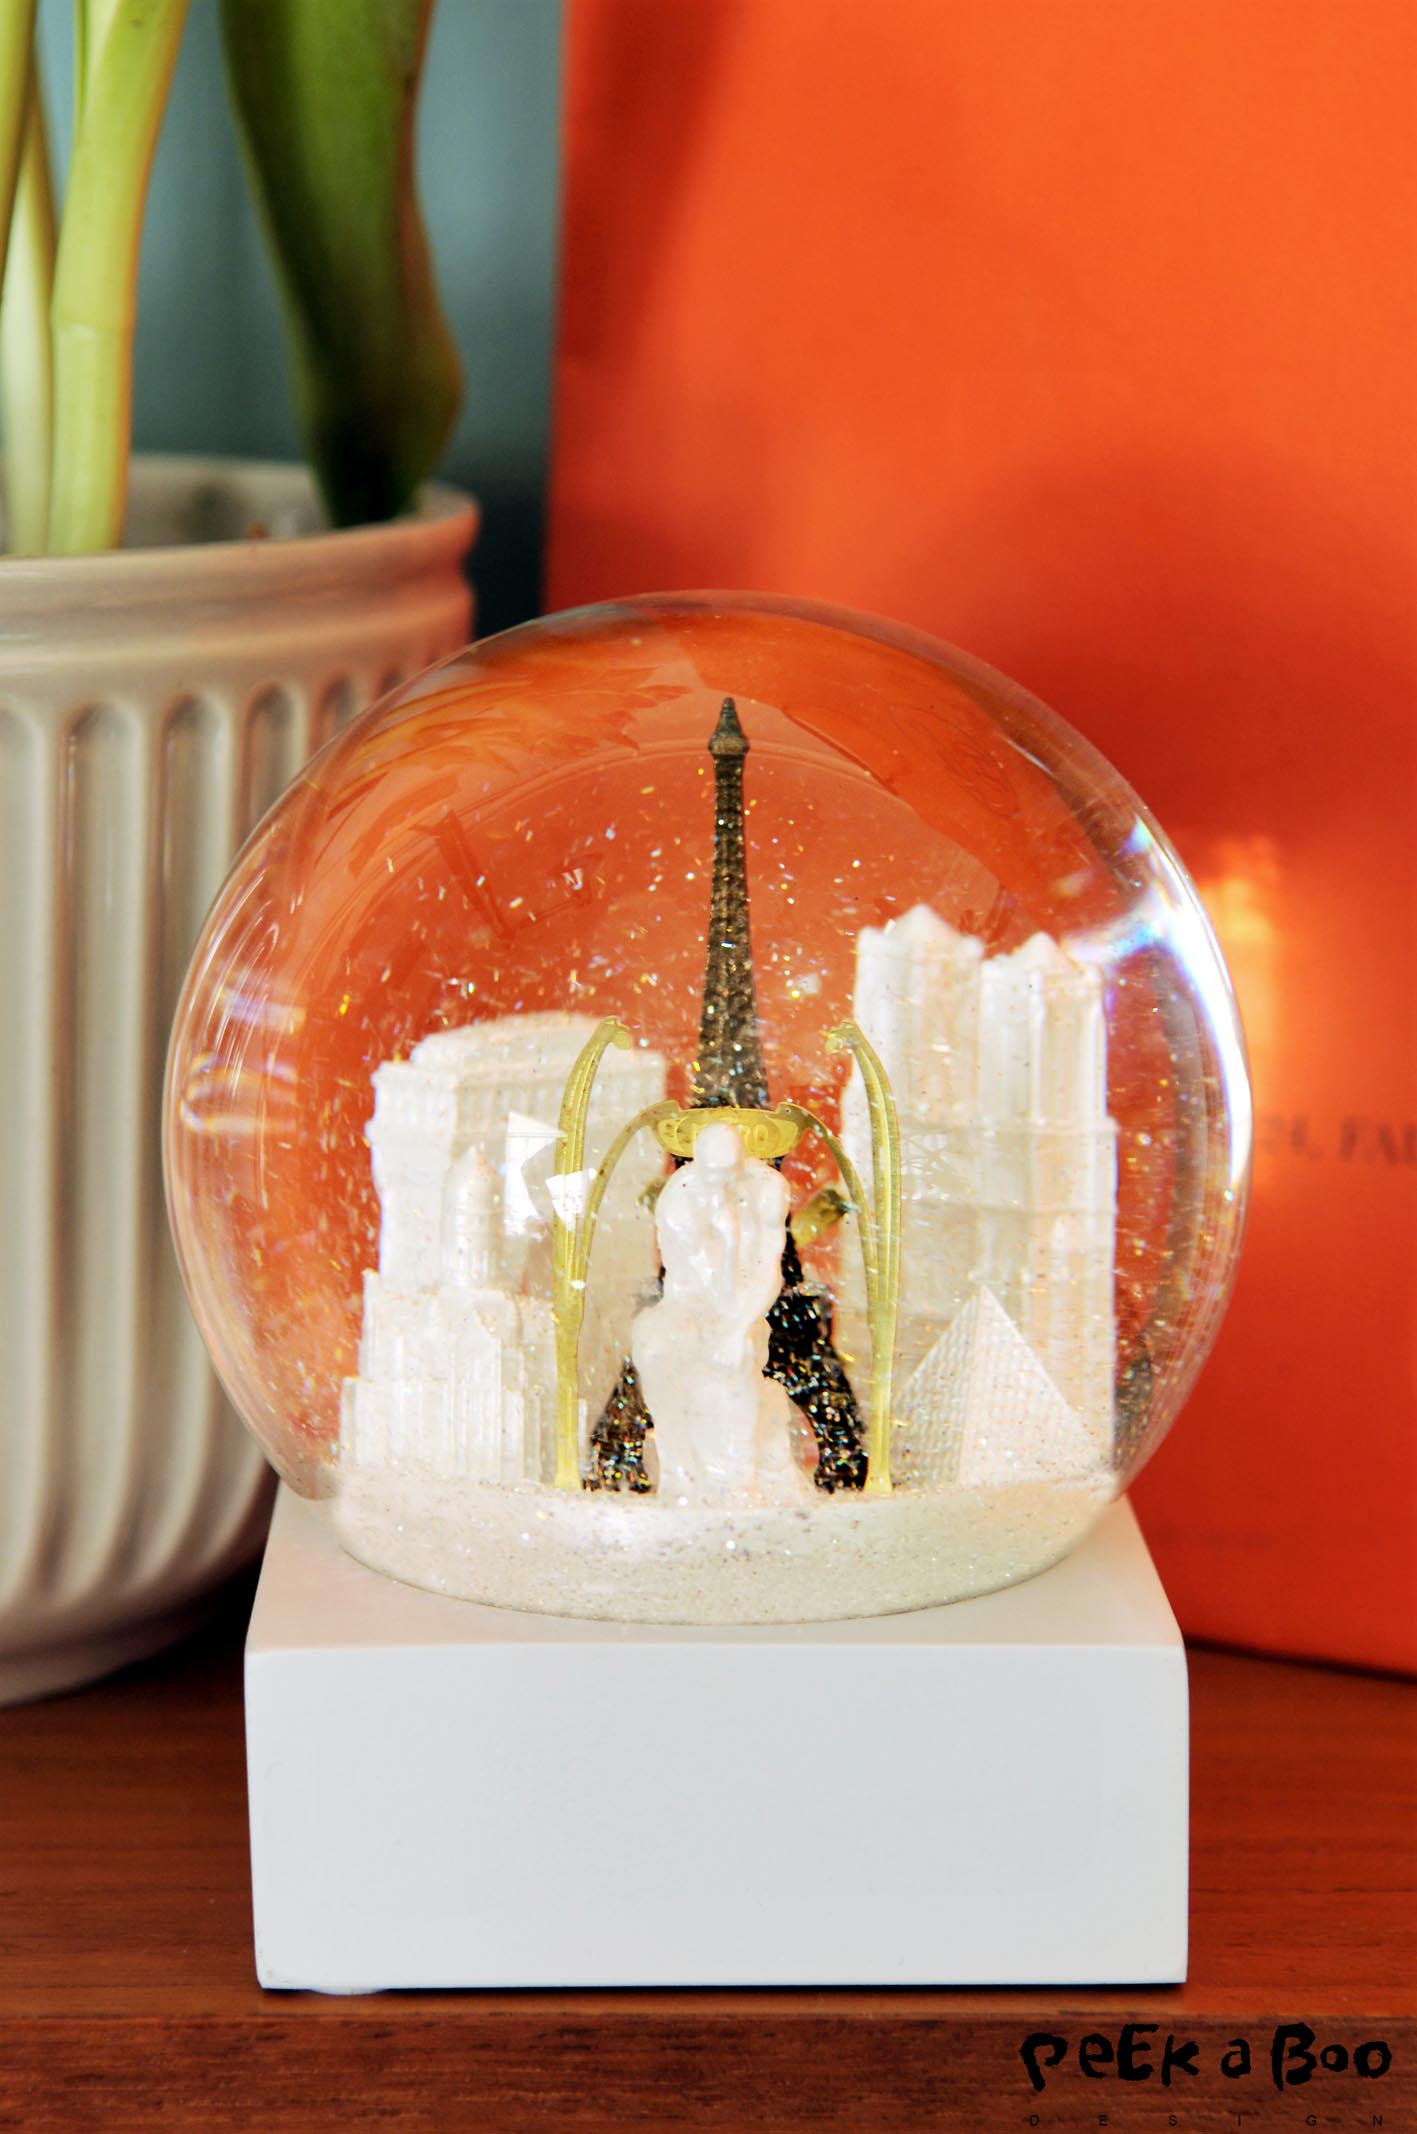 The snowglobe with icons from Paris, you can also find one from New York and London in the collection from Cool snow Globes.